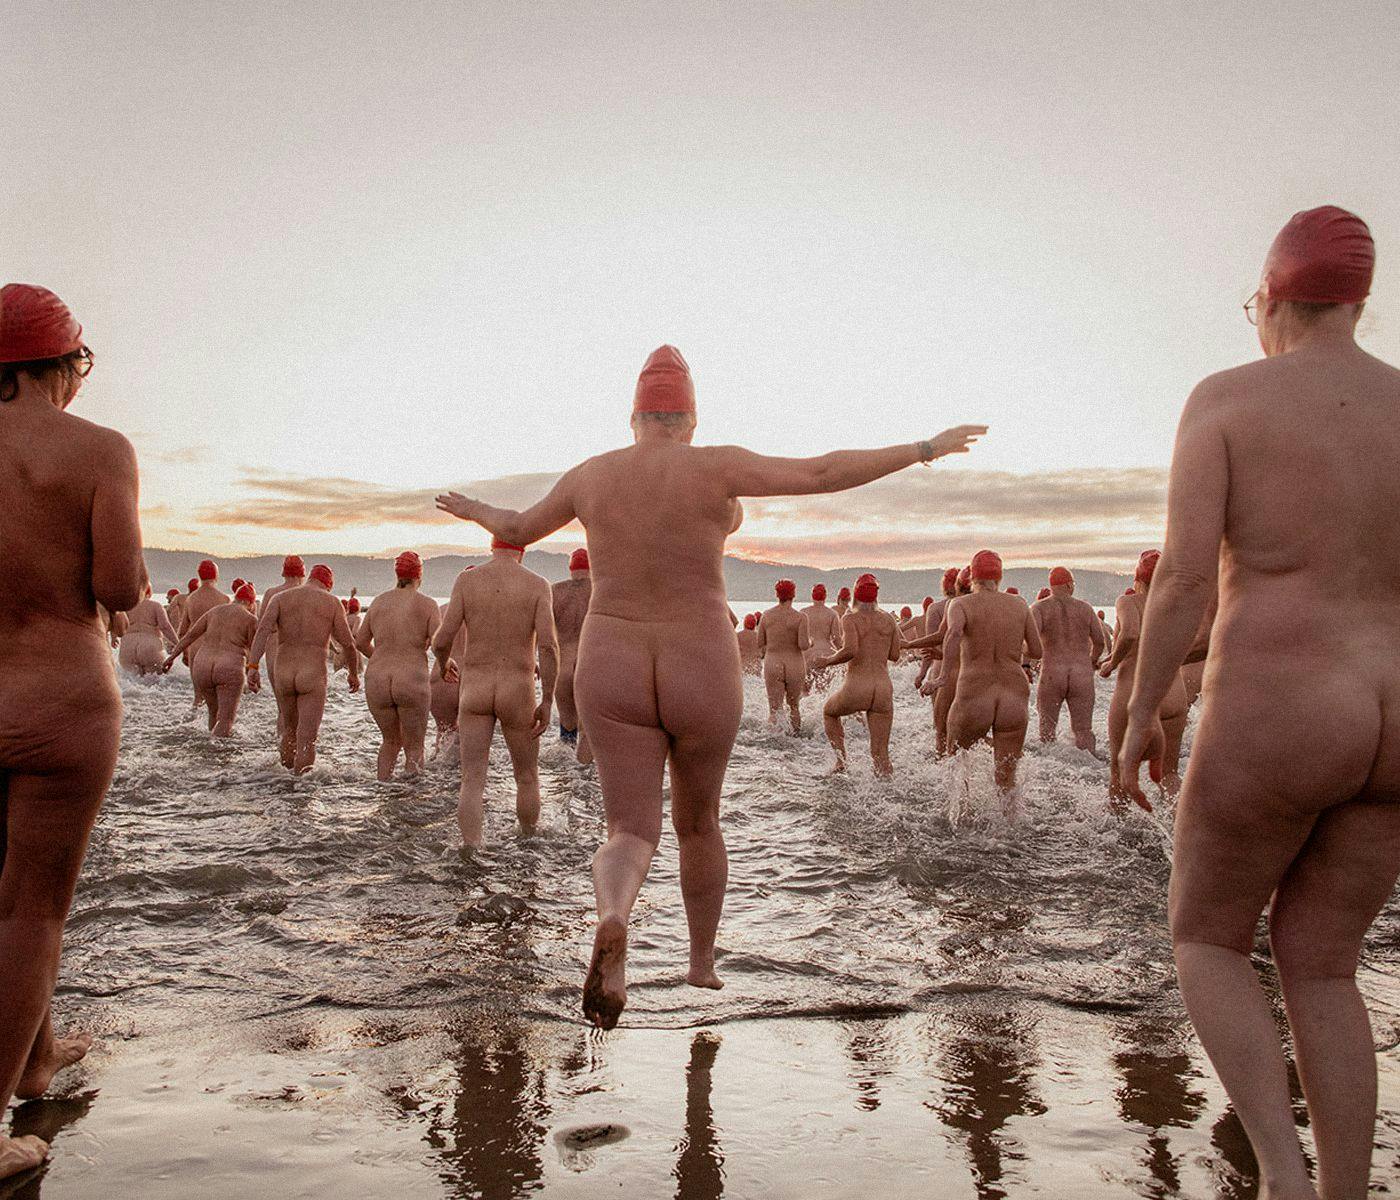 Several naked people wearing red swim caps run and jump into the ocean.